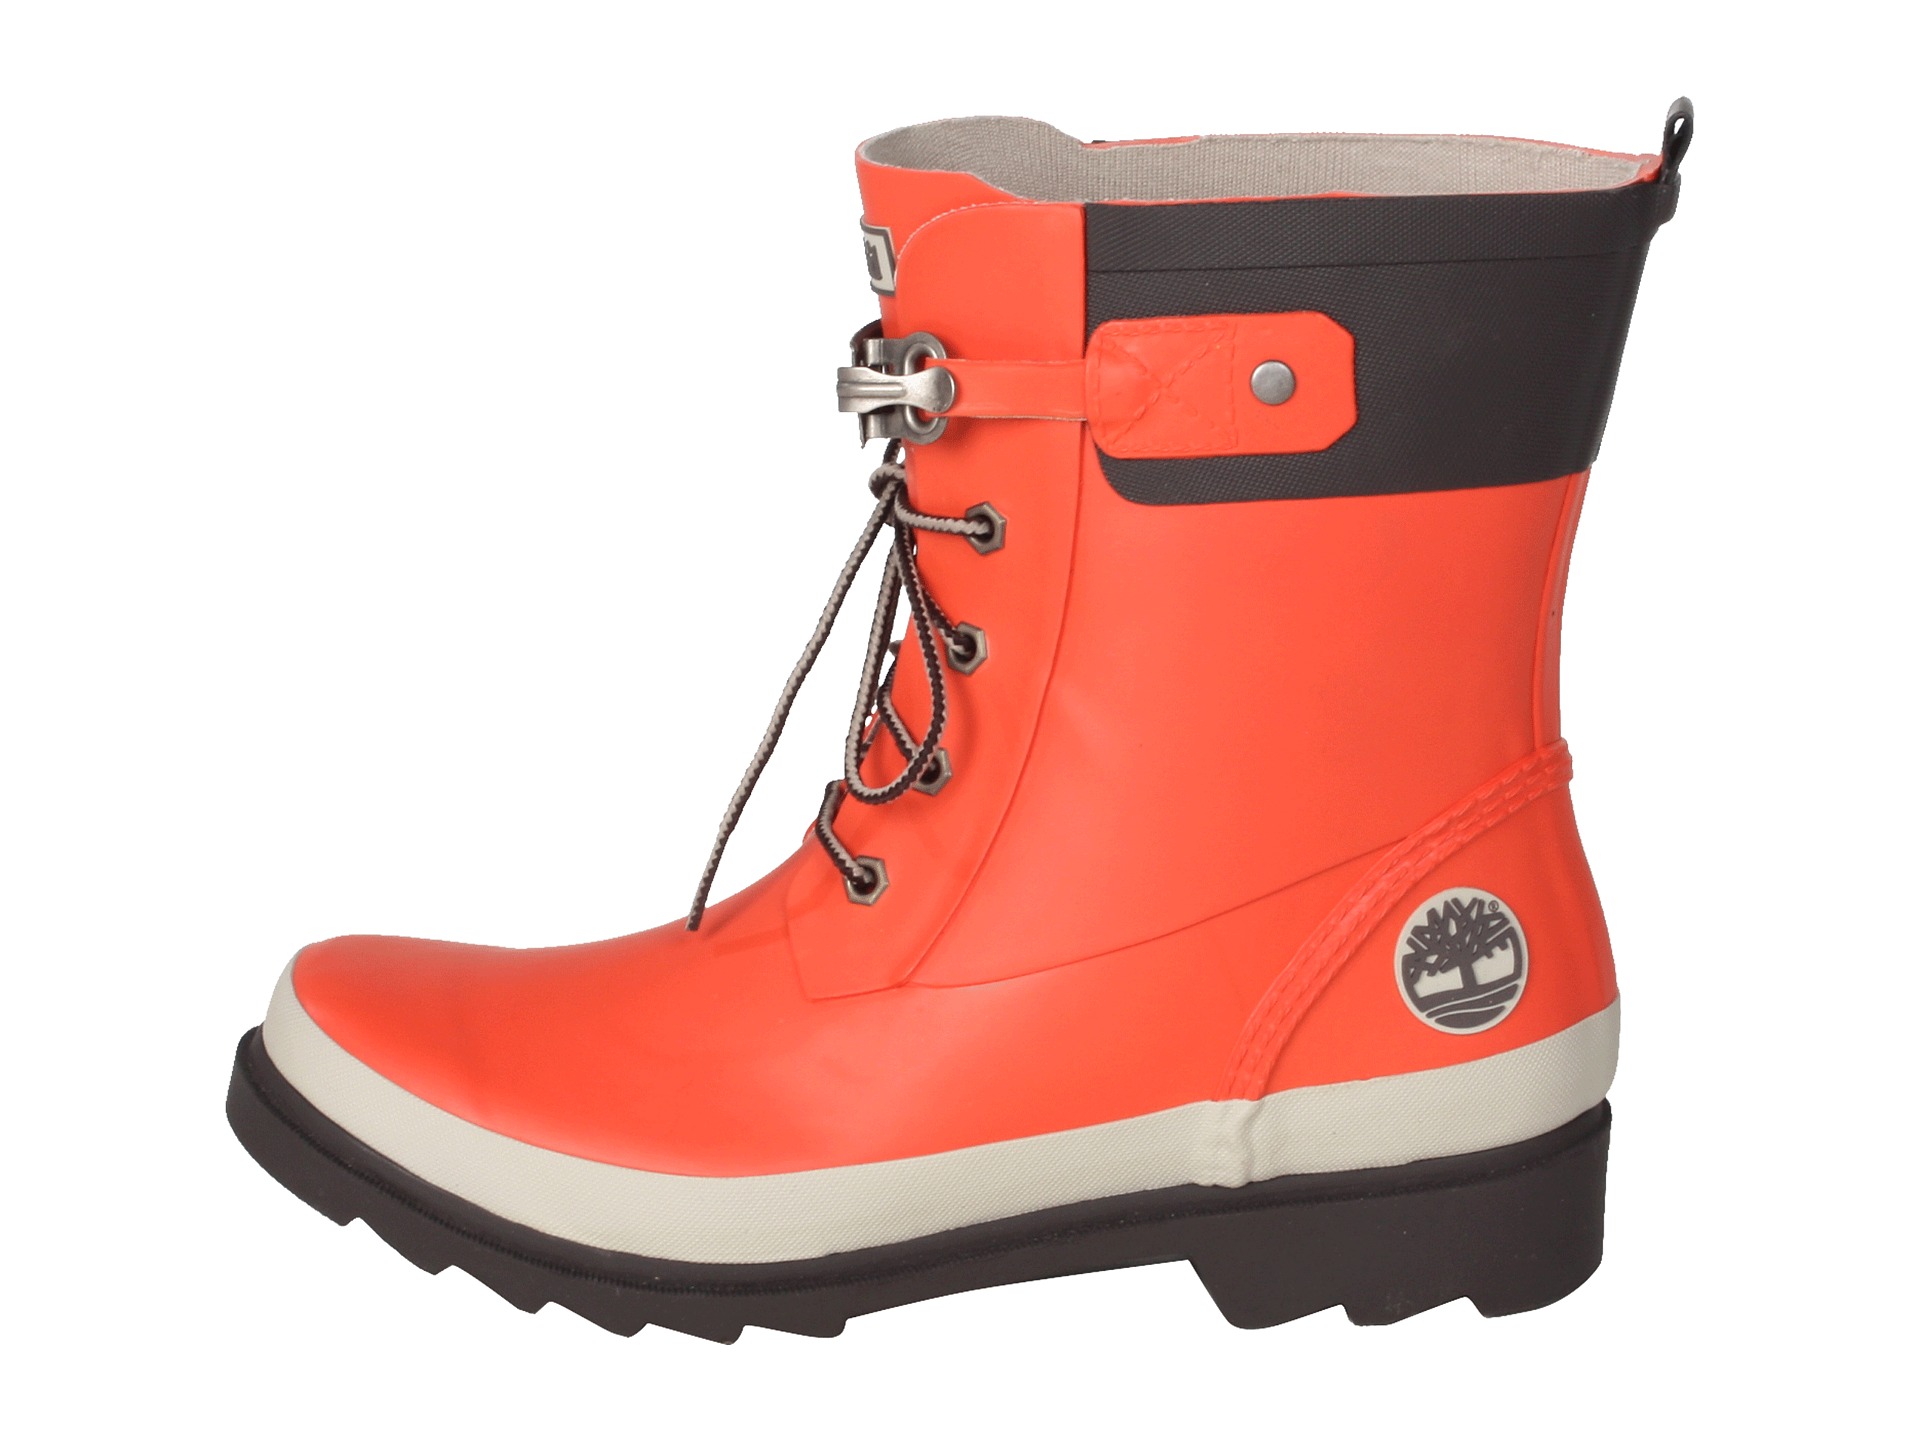 Timberland Rainboots With Style 